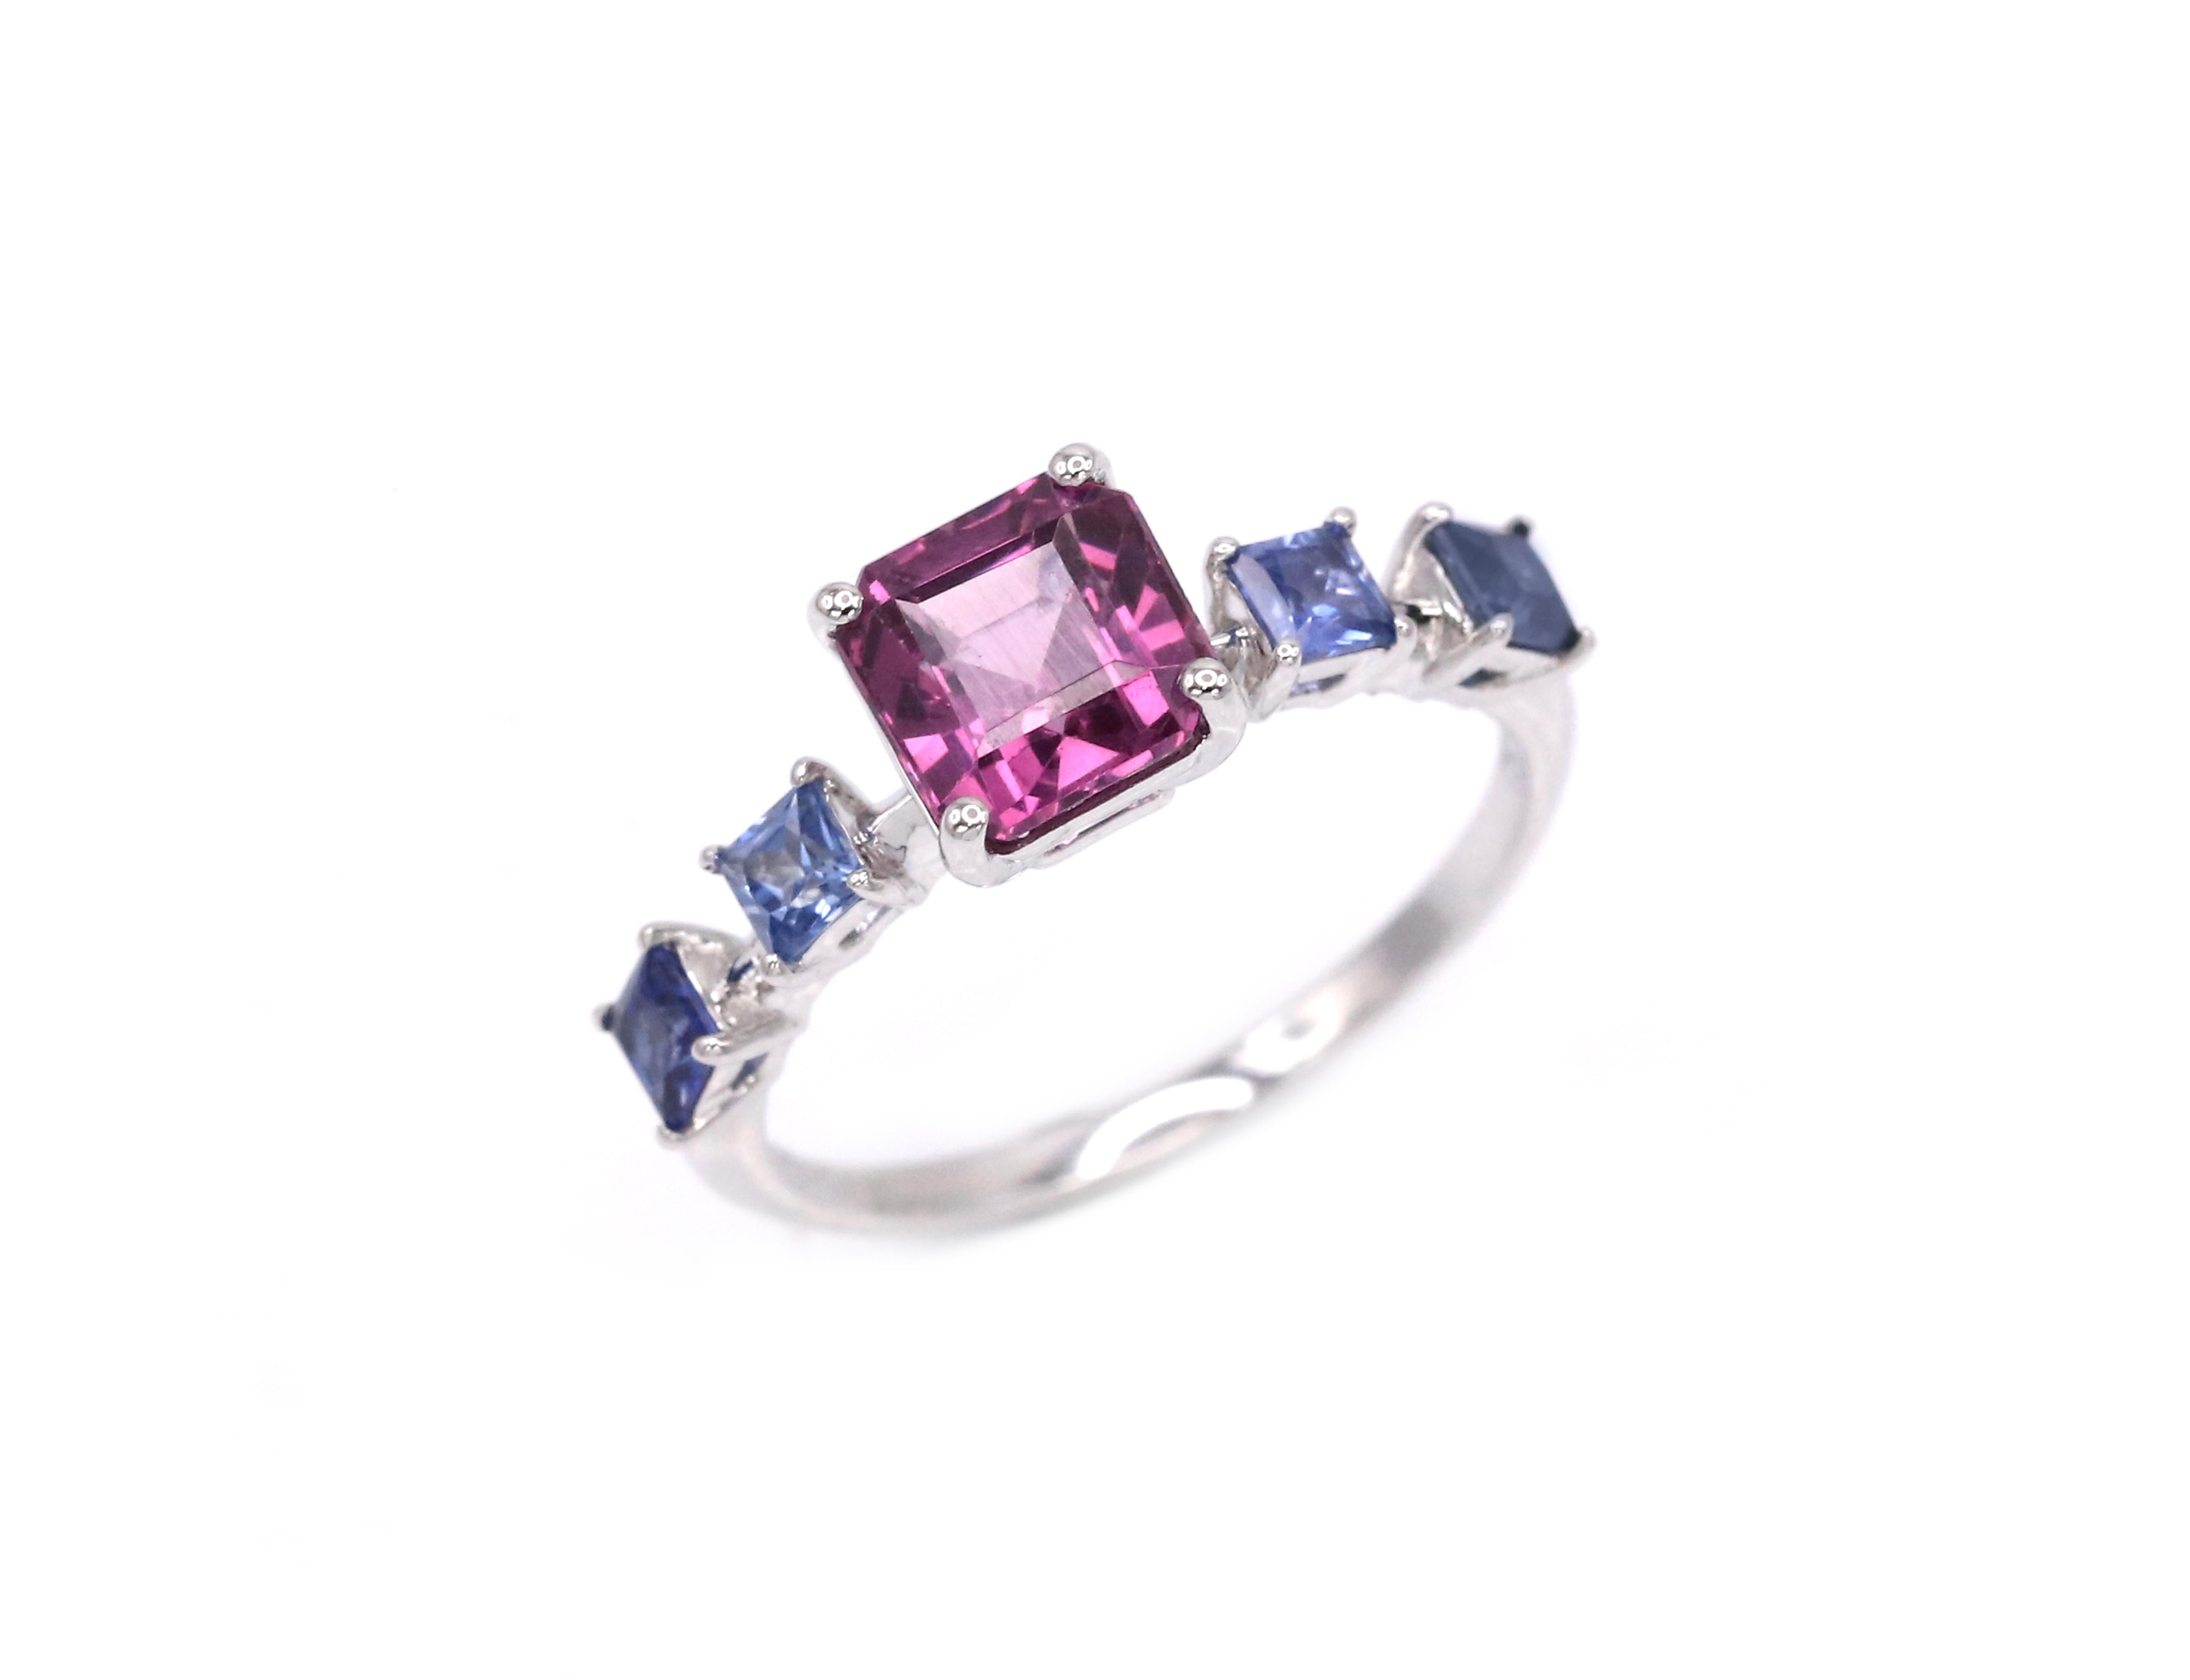 Extremely stylish fashionable 2.41 CTW Garnet Blue Sapphire 18K Gold Cocktail Ring.
It could be perfect for special occasion or for every day use.
The item contains 4 Blue Sapphires of total weight 0.61 ct, 1 Garnet of 1.88 ct, White Gold.

SIZE of